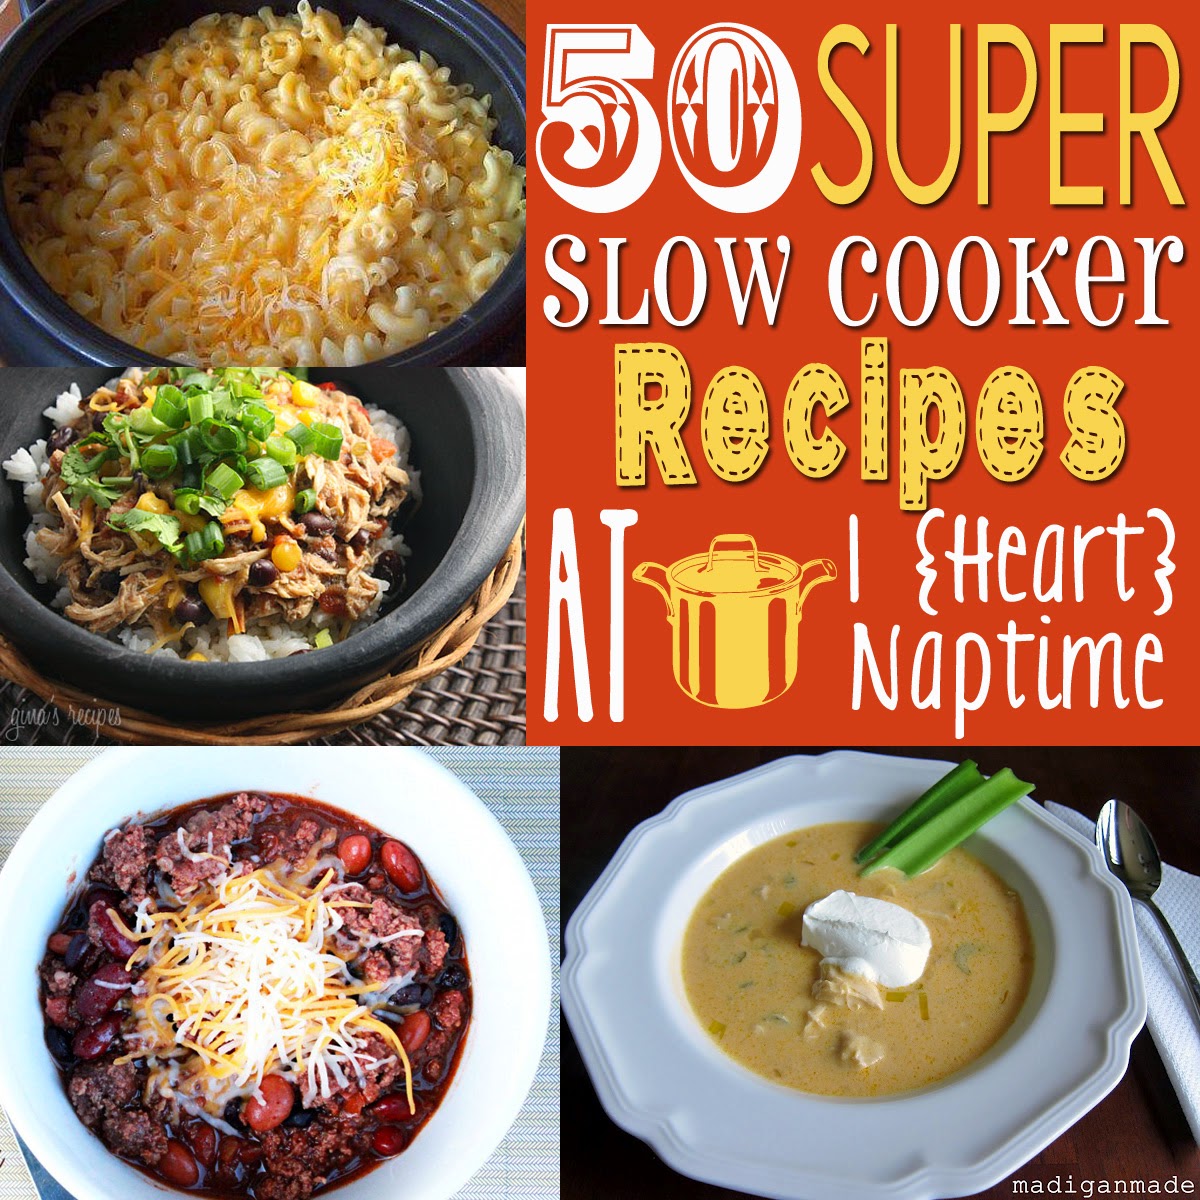 50 Delicious Slow Cooker Recipes